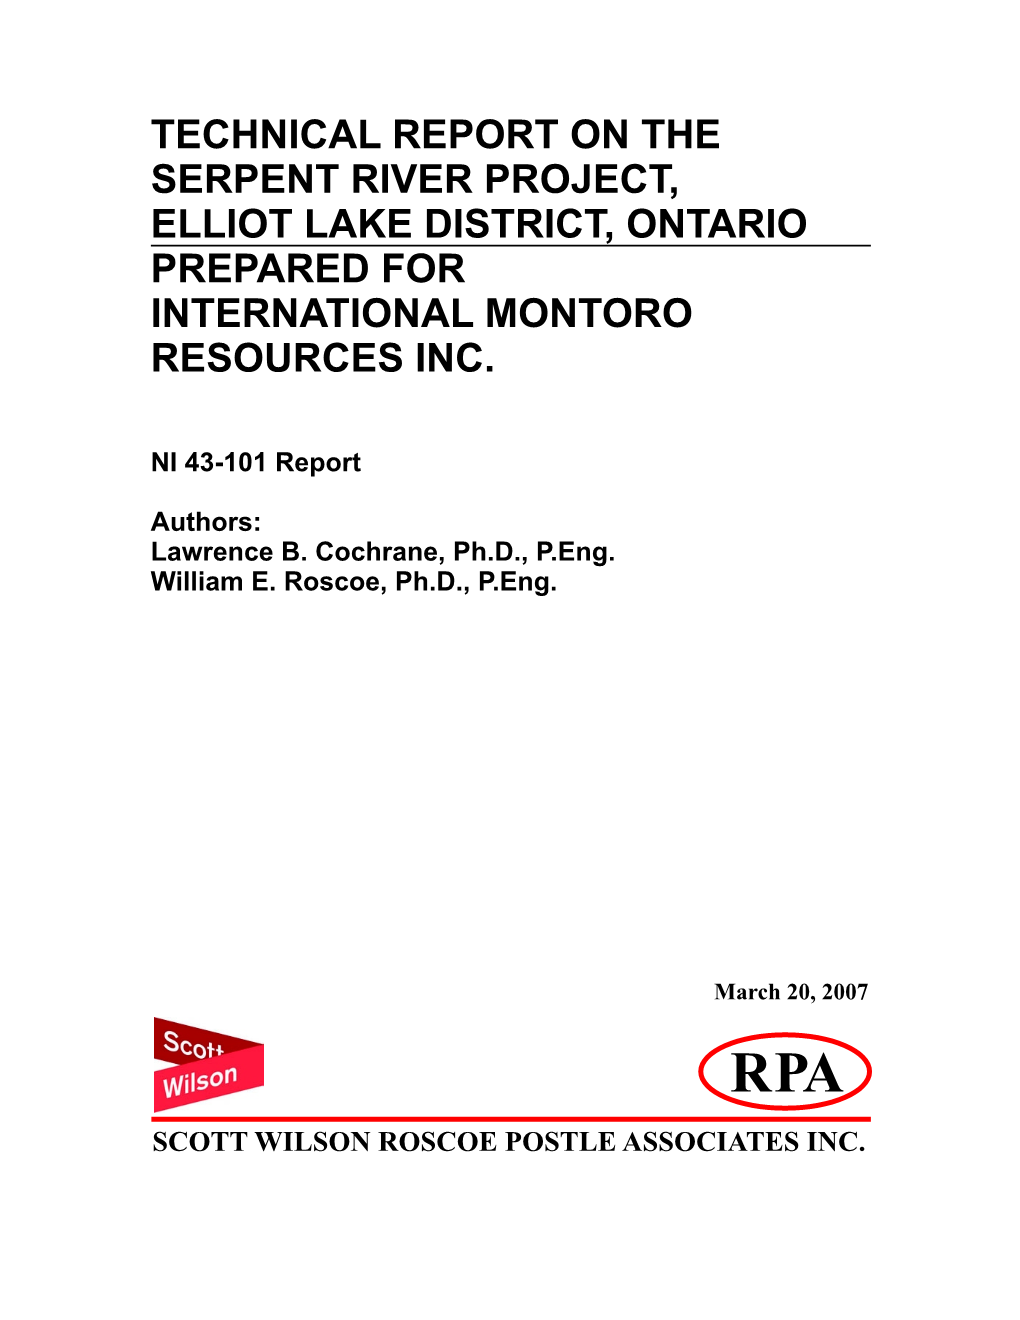 Technical Report on the Serpent River Project, Elliot Lake District, Ontario Prepared for International Montoro Resources Inc